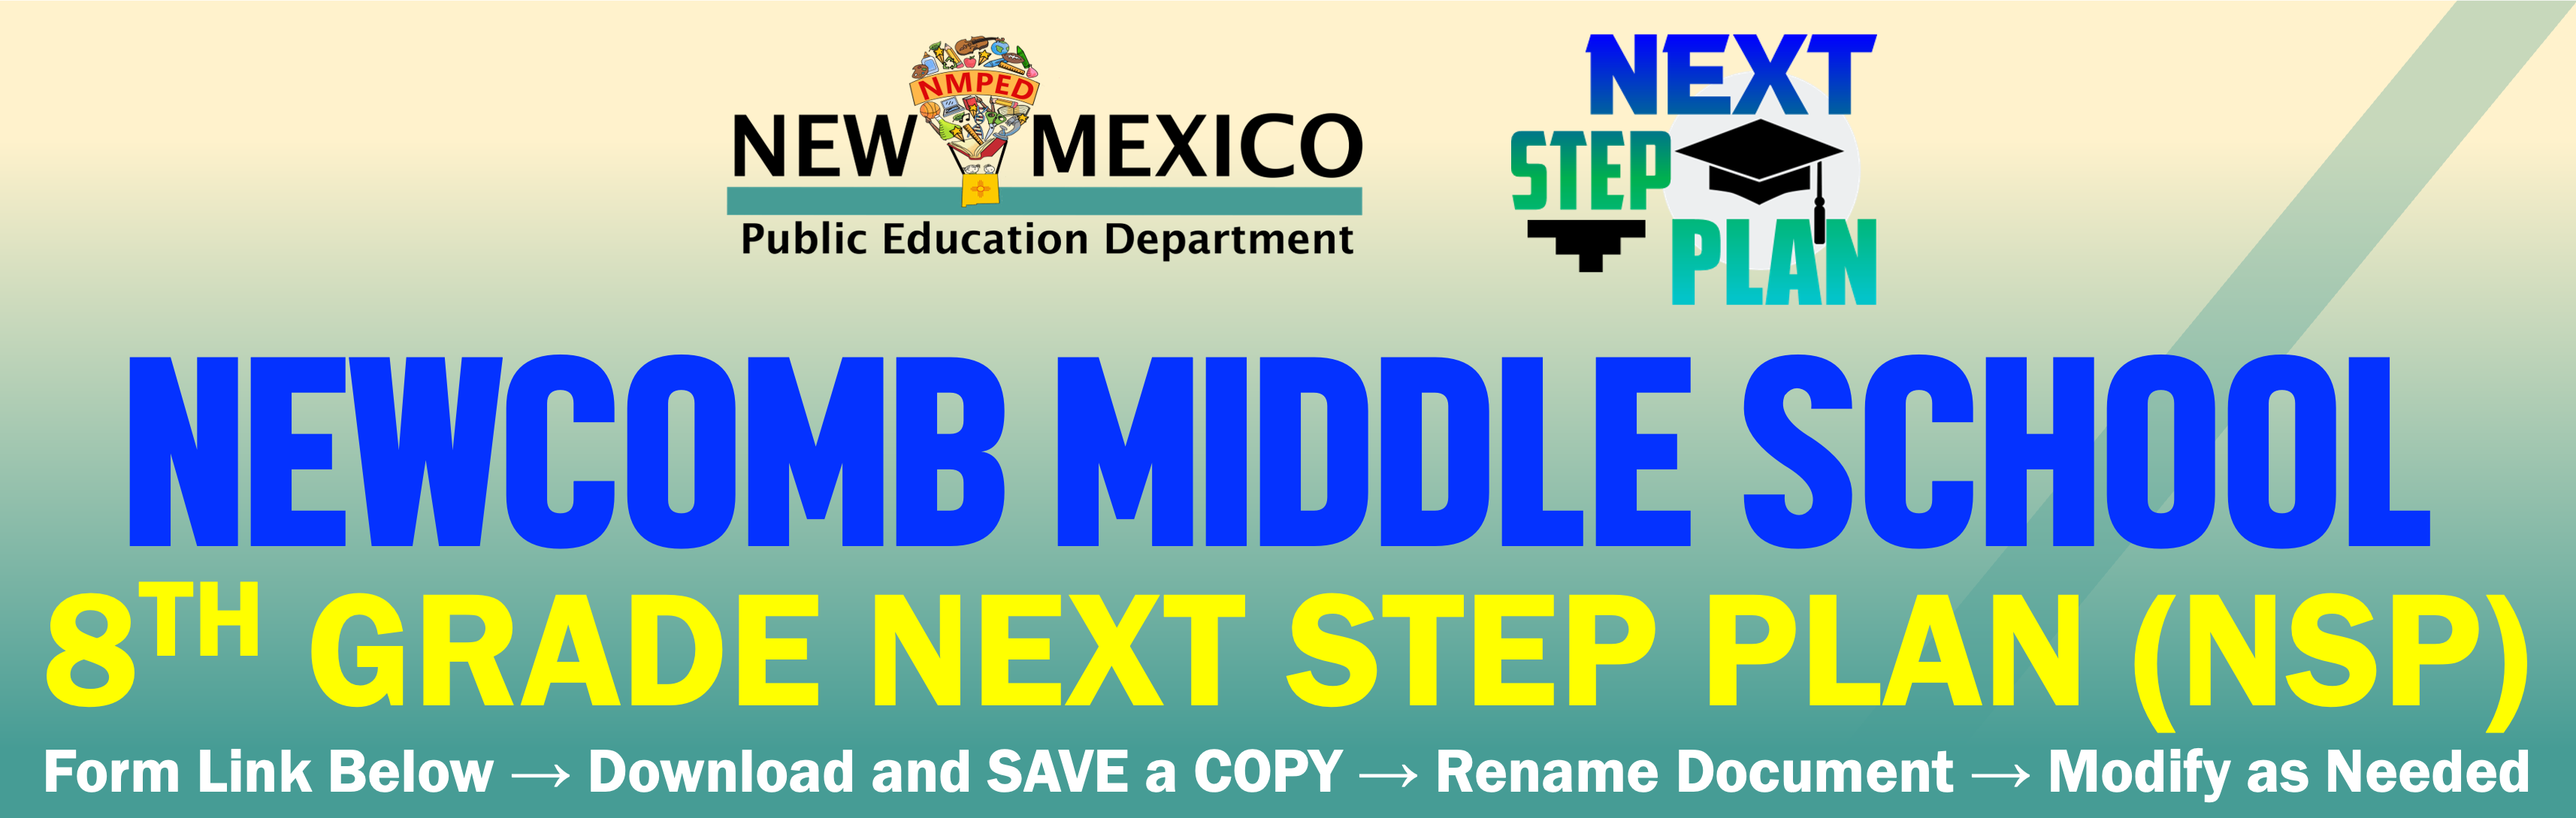 Newcomb Middle School, 8th Grade Next Step Plan Form Header